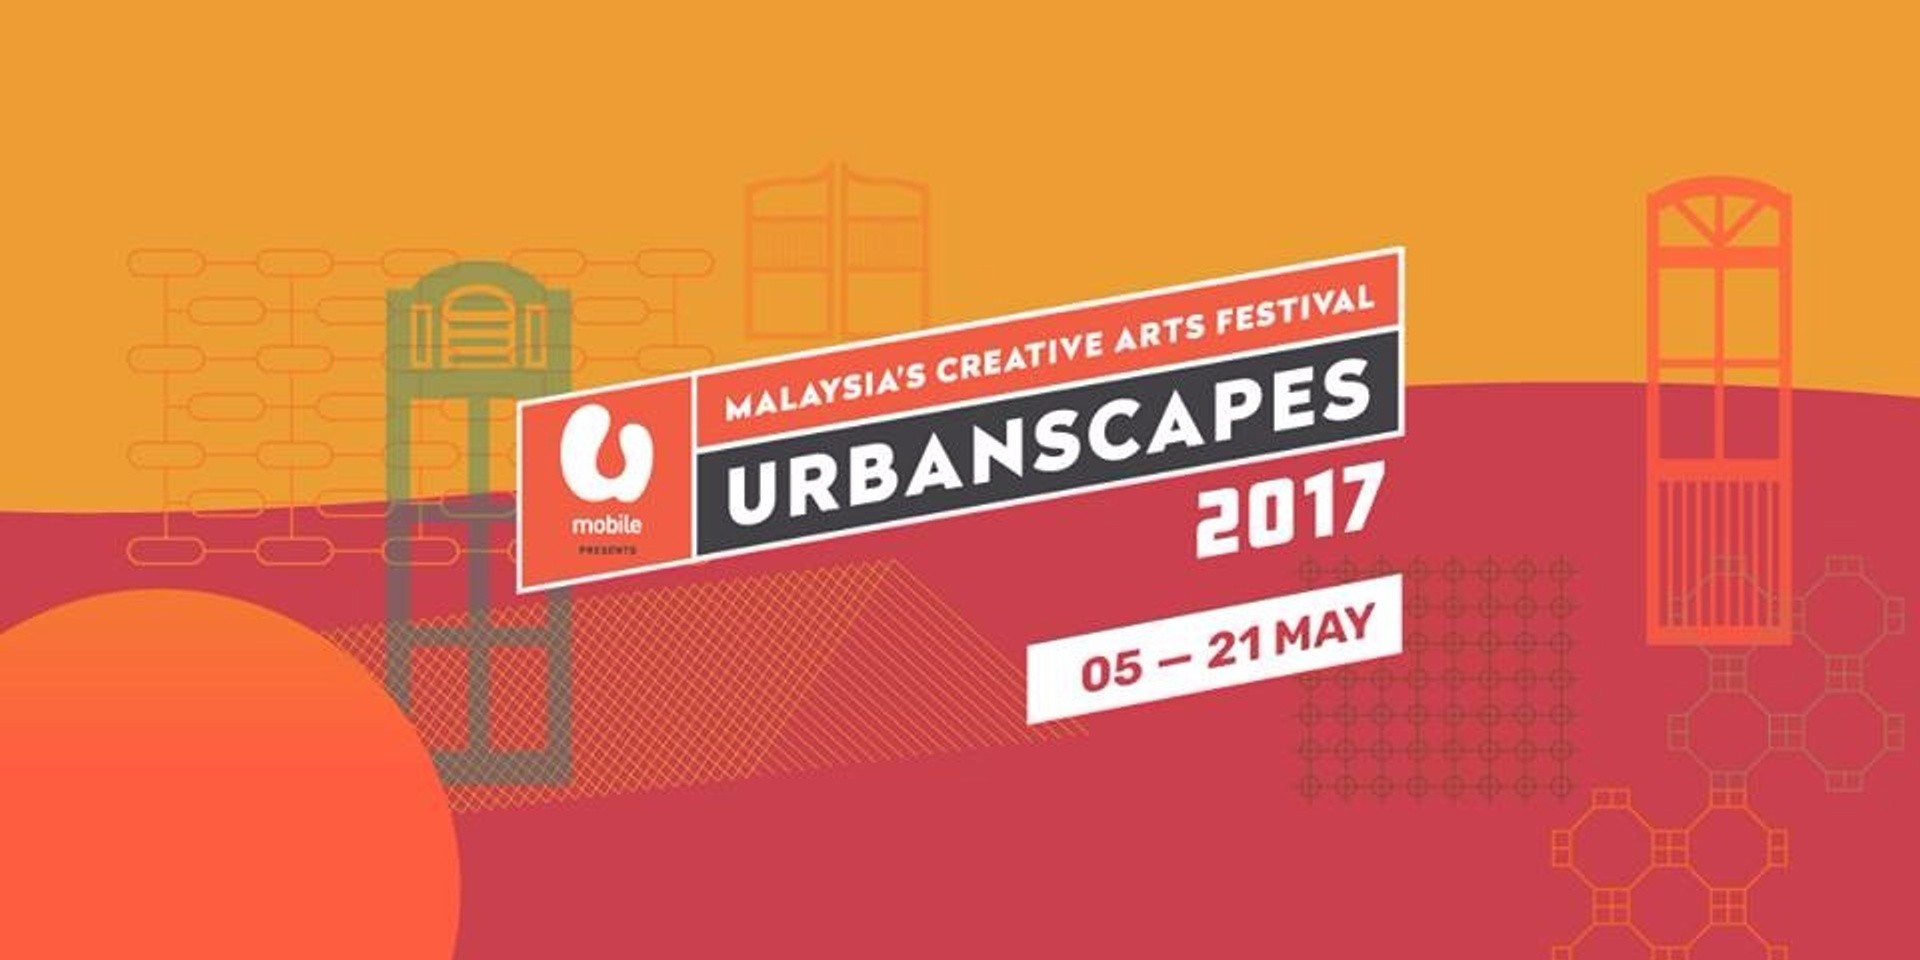 Urbanscapes 2017 announces exciting first wave lineup — featuring Mew, Clean Bandit, TTNG and many more